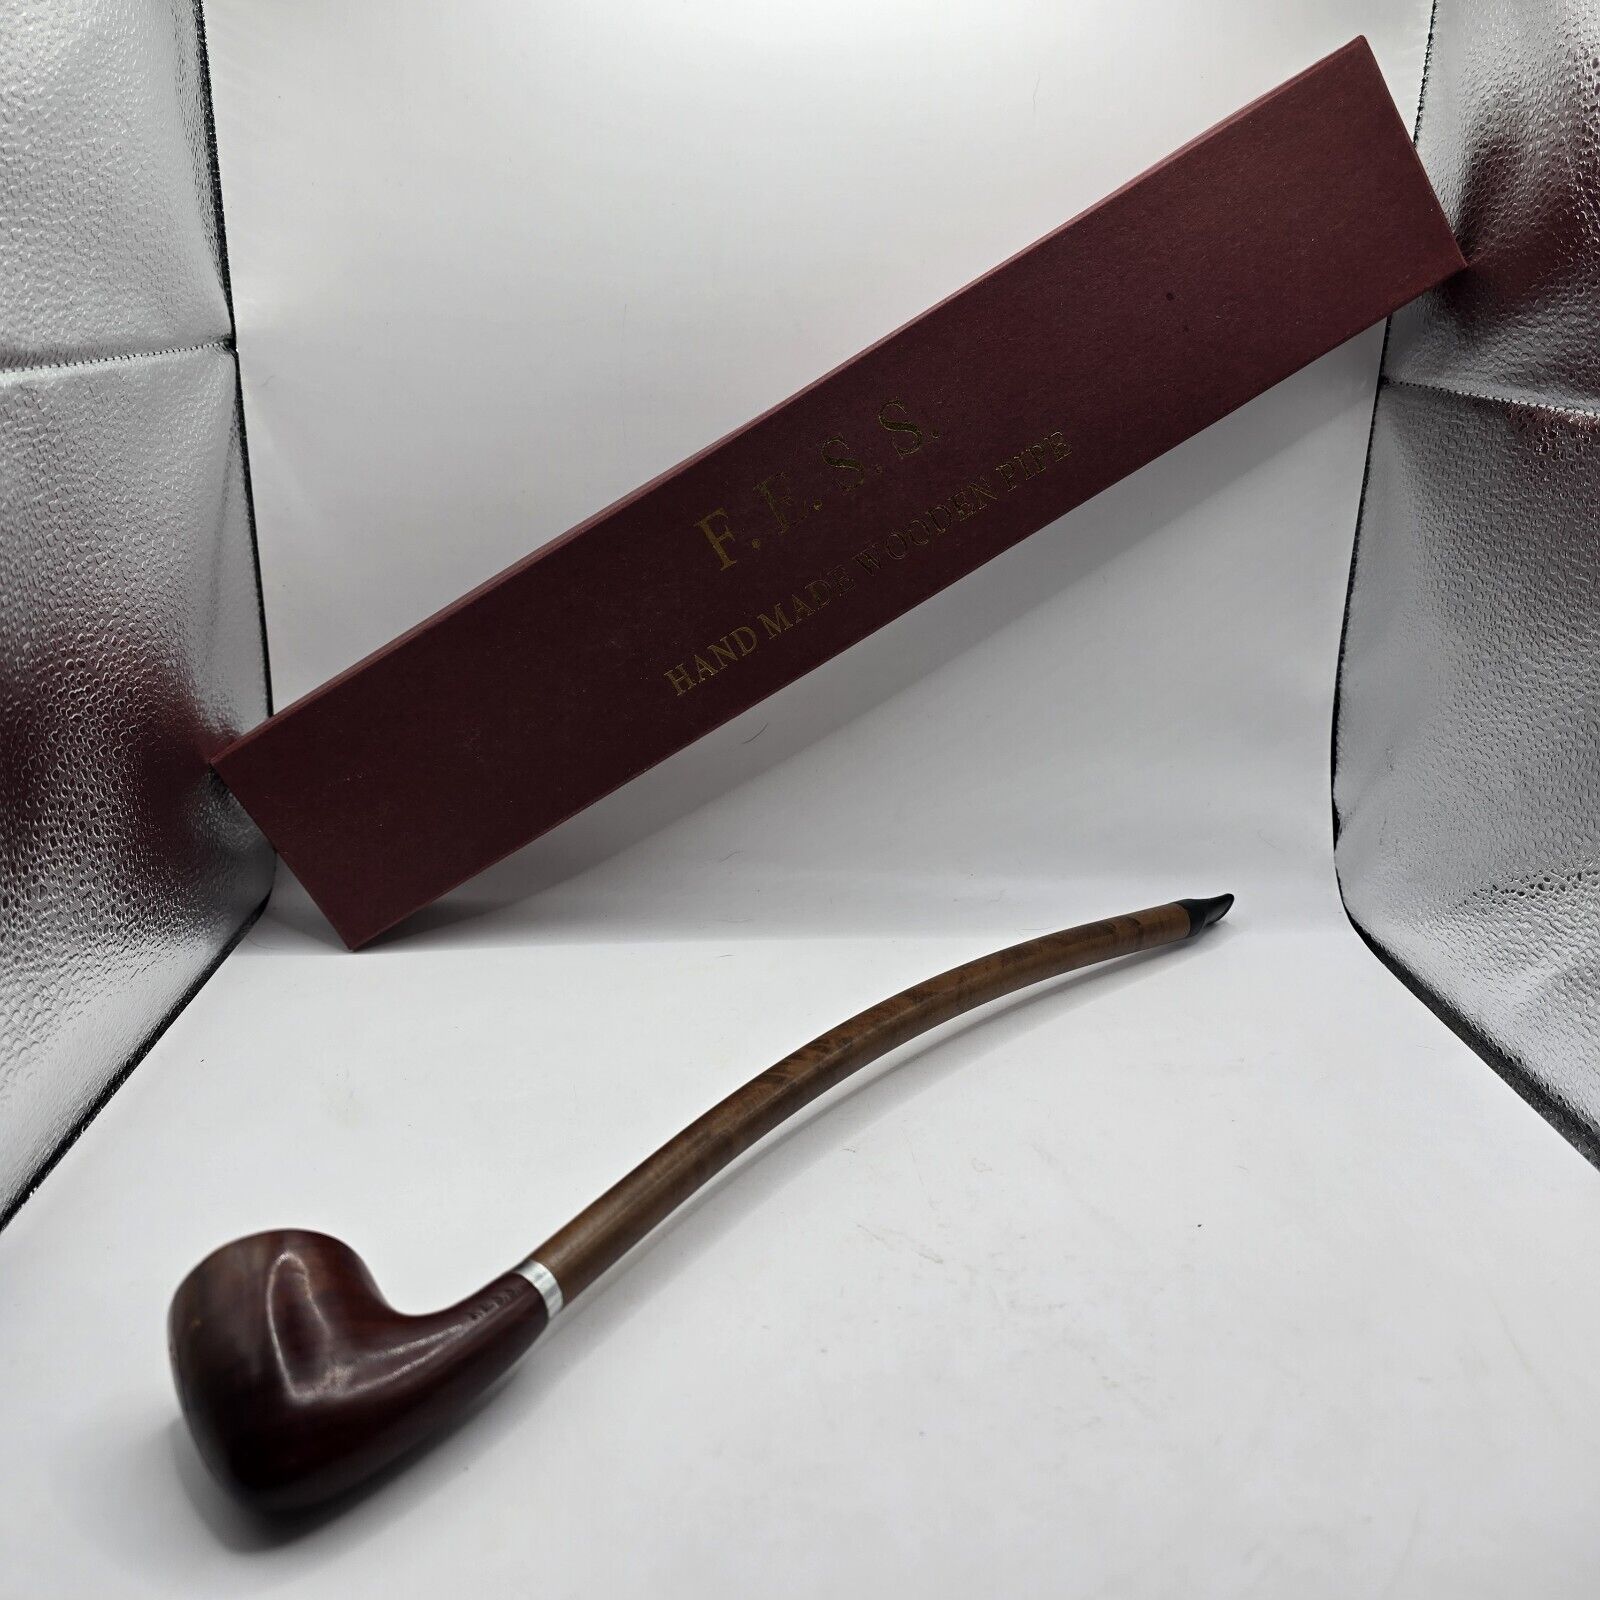 F.E.S.S. Hand Made Long Stem Wooden Pipe - Cracked - With Box